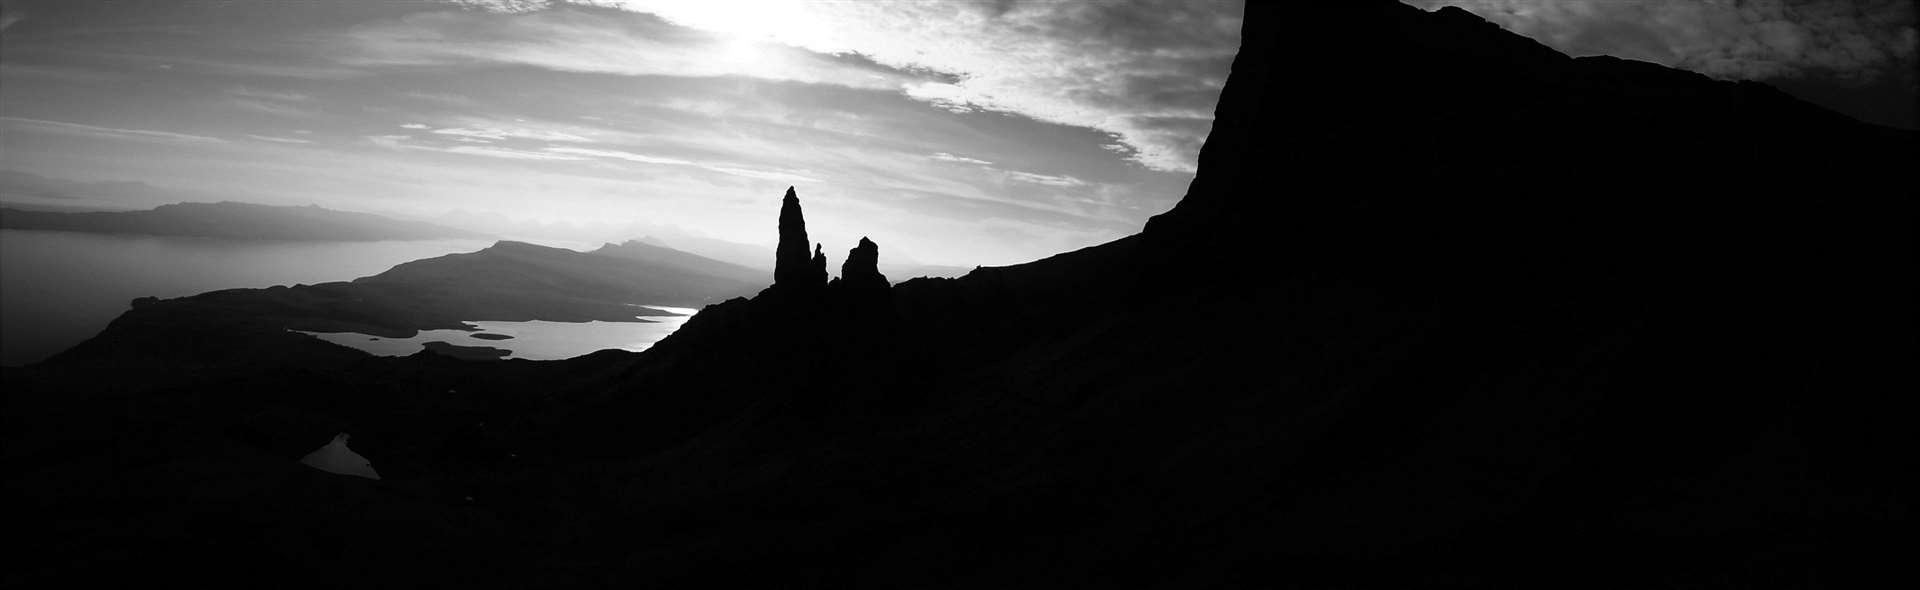 The Old Man of Storr on Skye. Picture: Philip Murray.